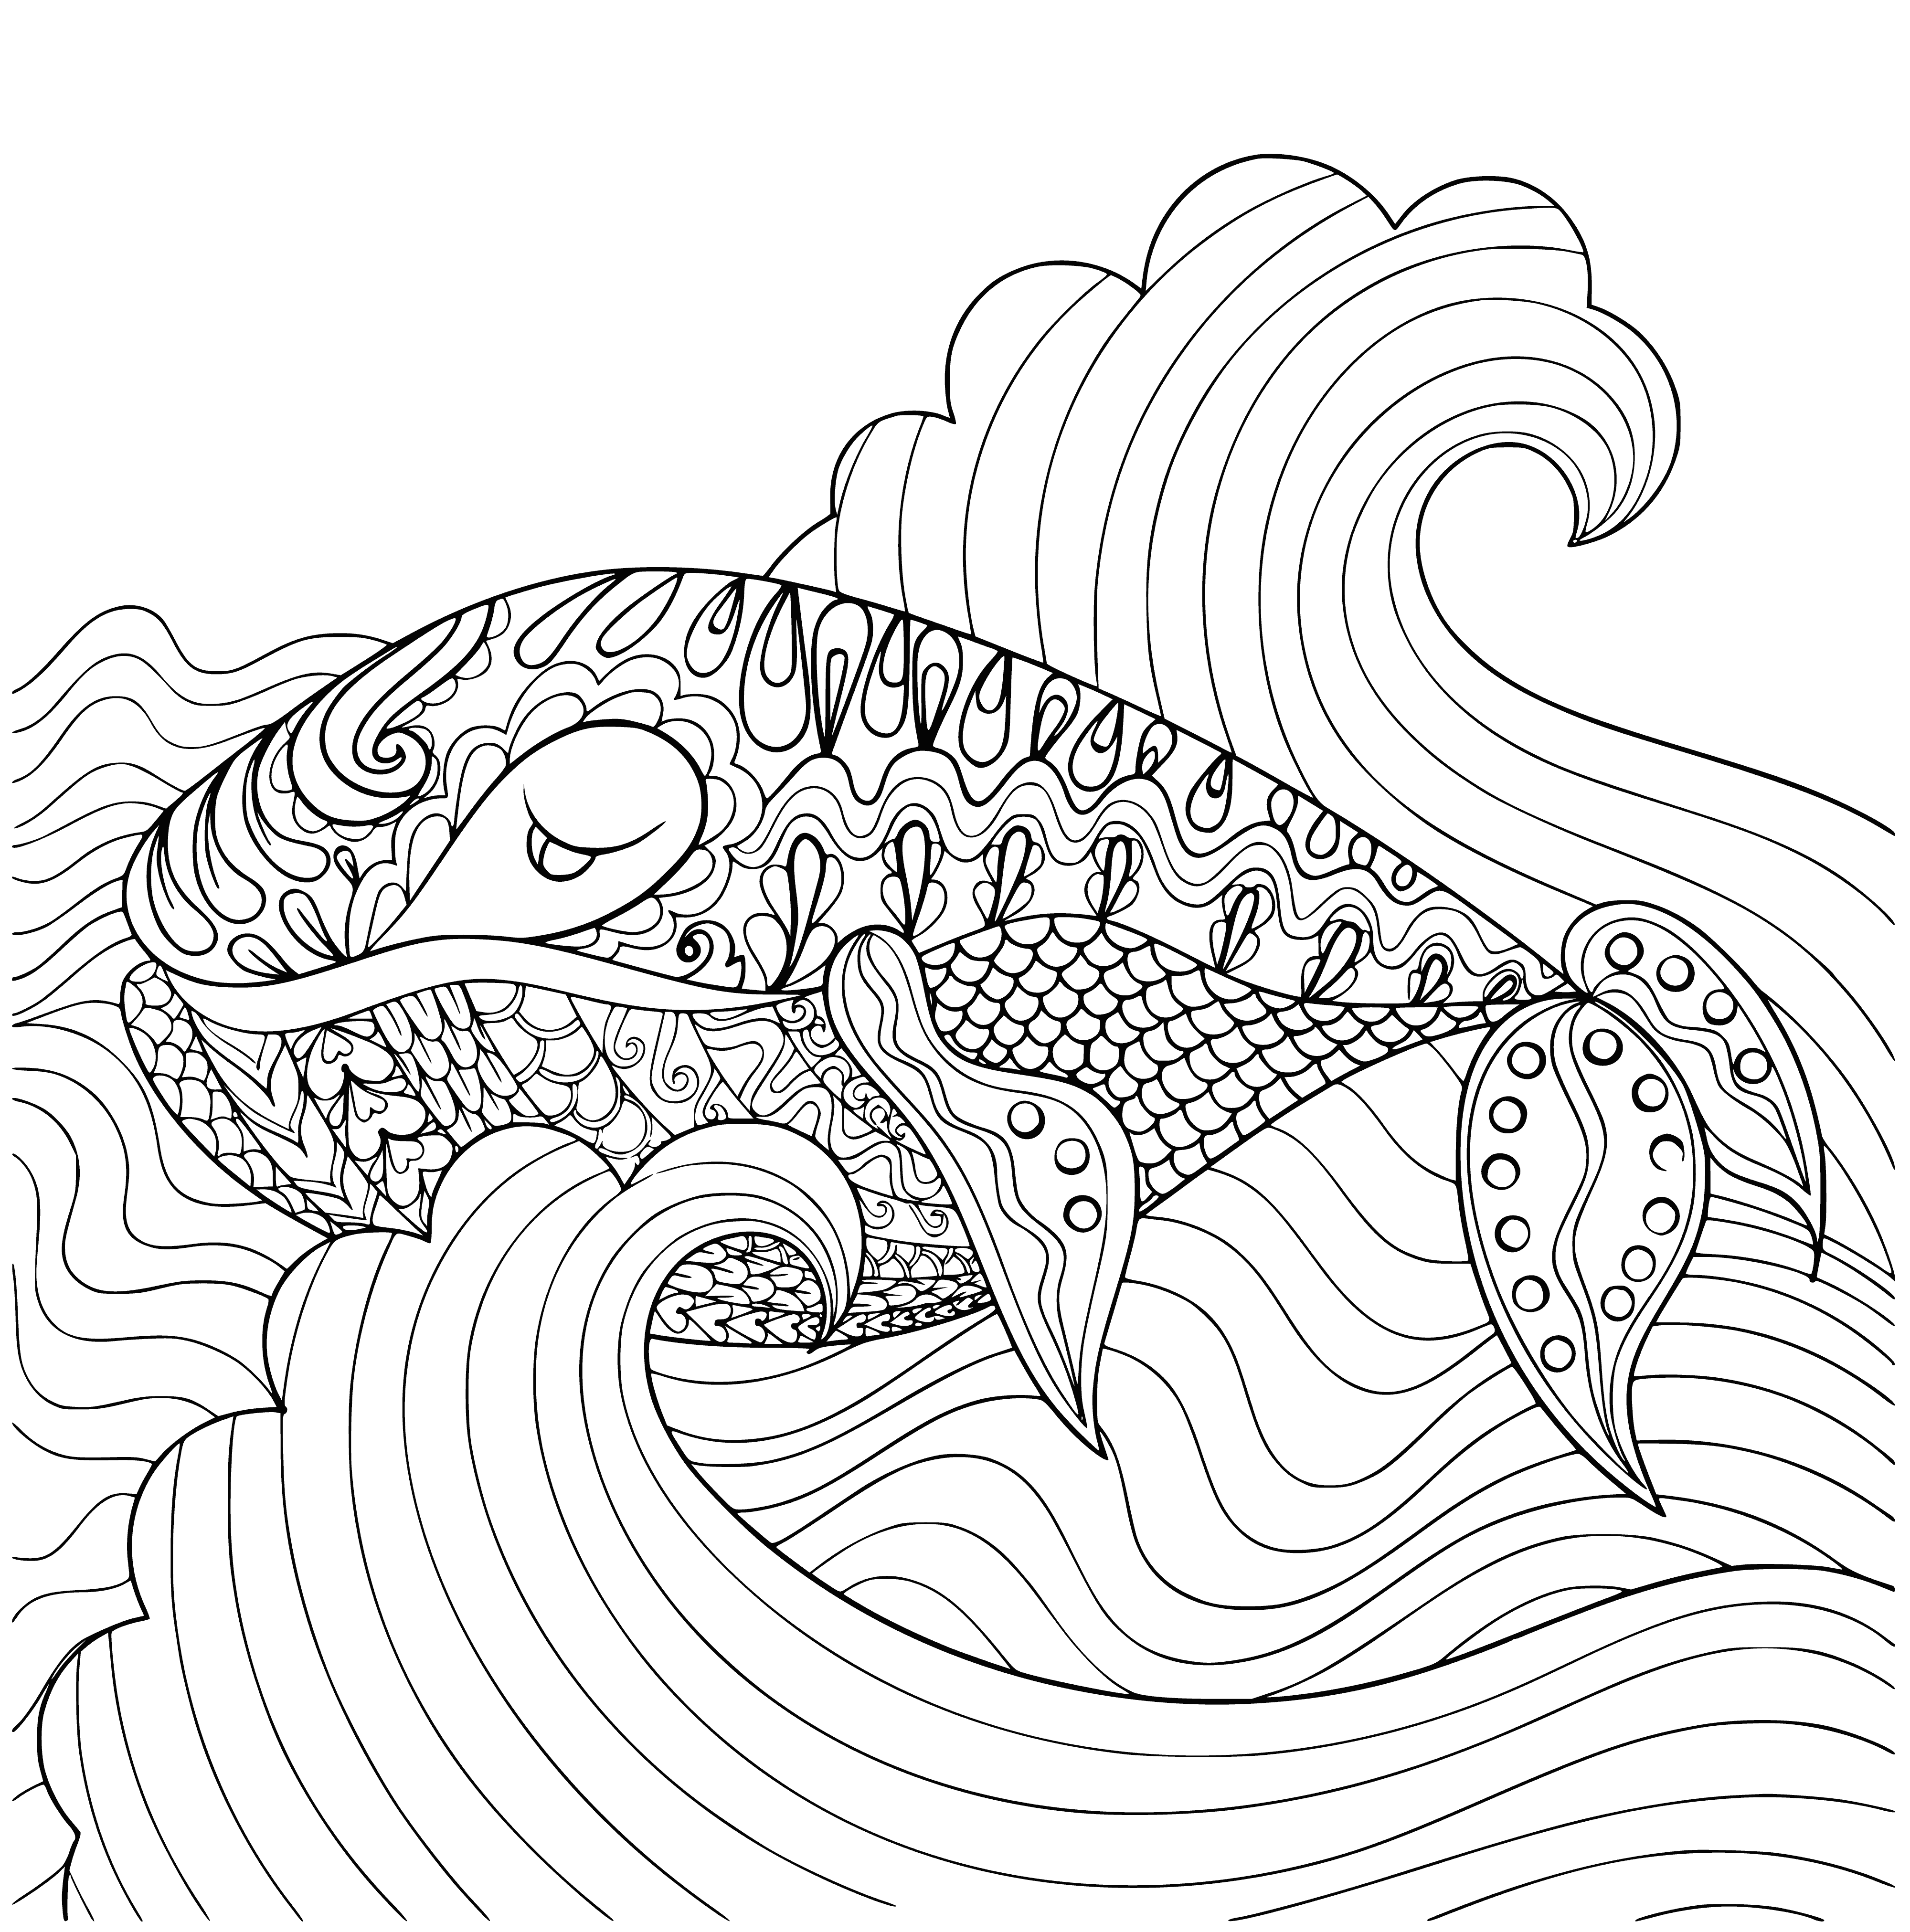 Whale in the sea coloring page